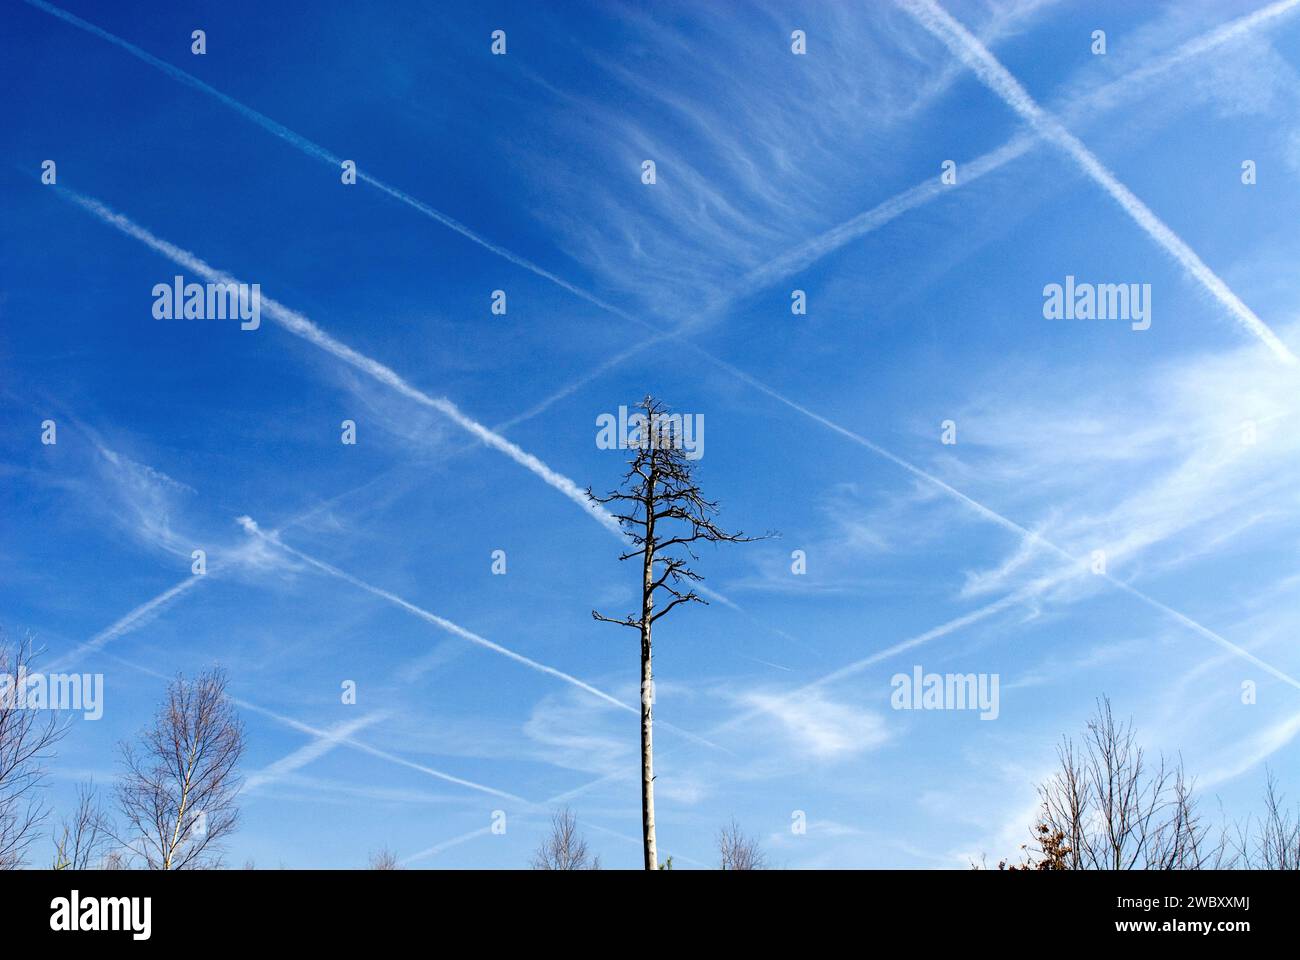 a dead pine tree in Perlacher Forst, the blue sky is showing a net of contrails, condensation trails, possibly chemtrails, Munich, Bavaria, Germany Stock Photo